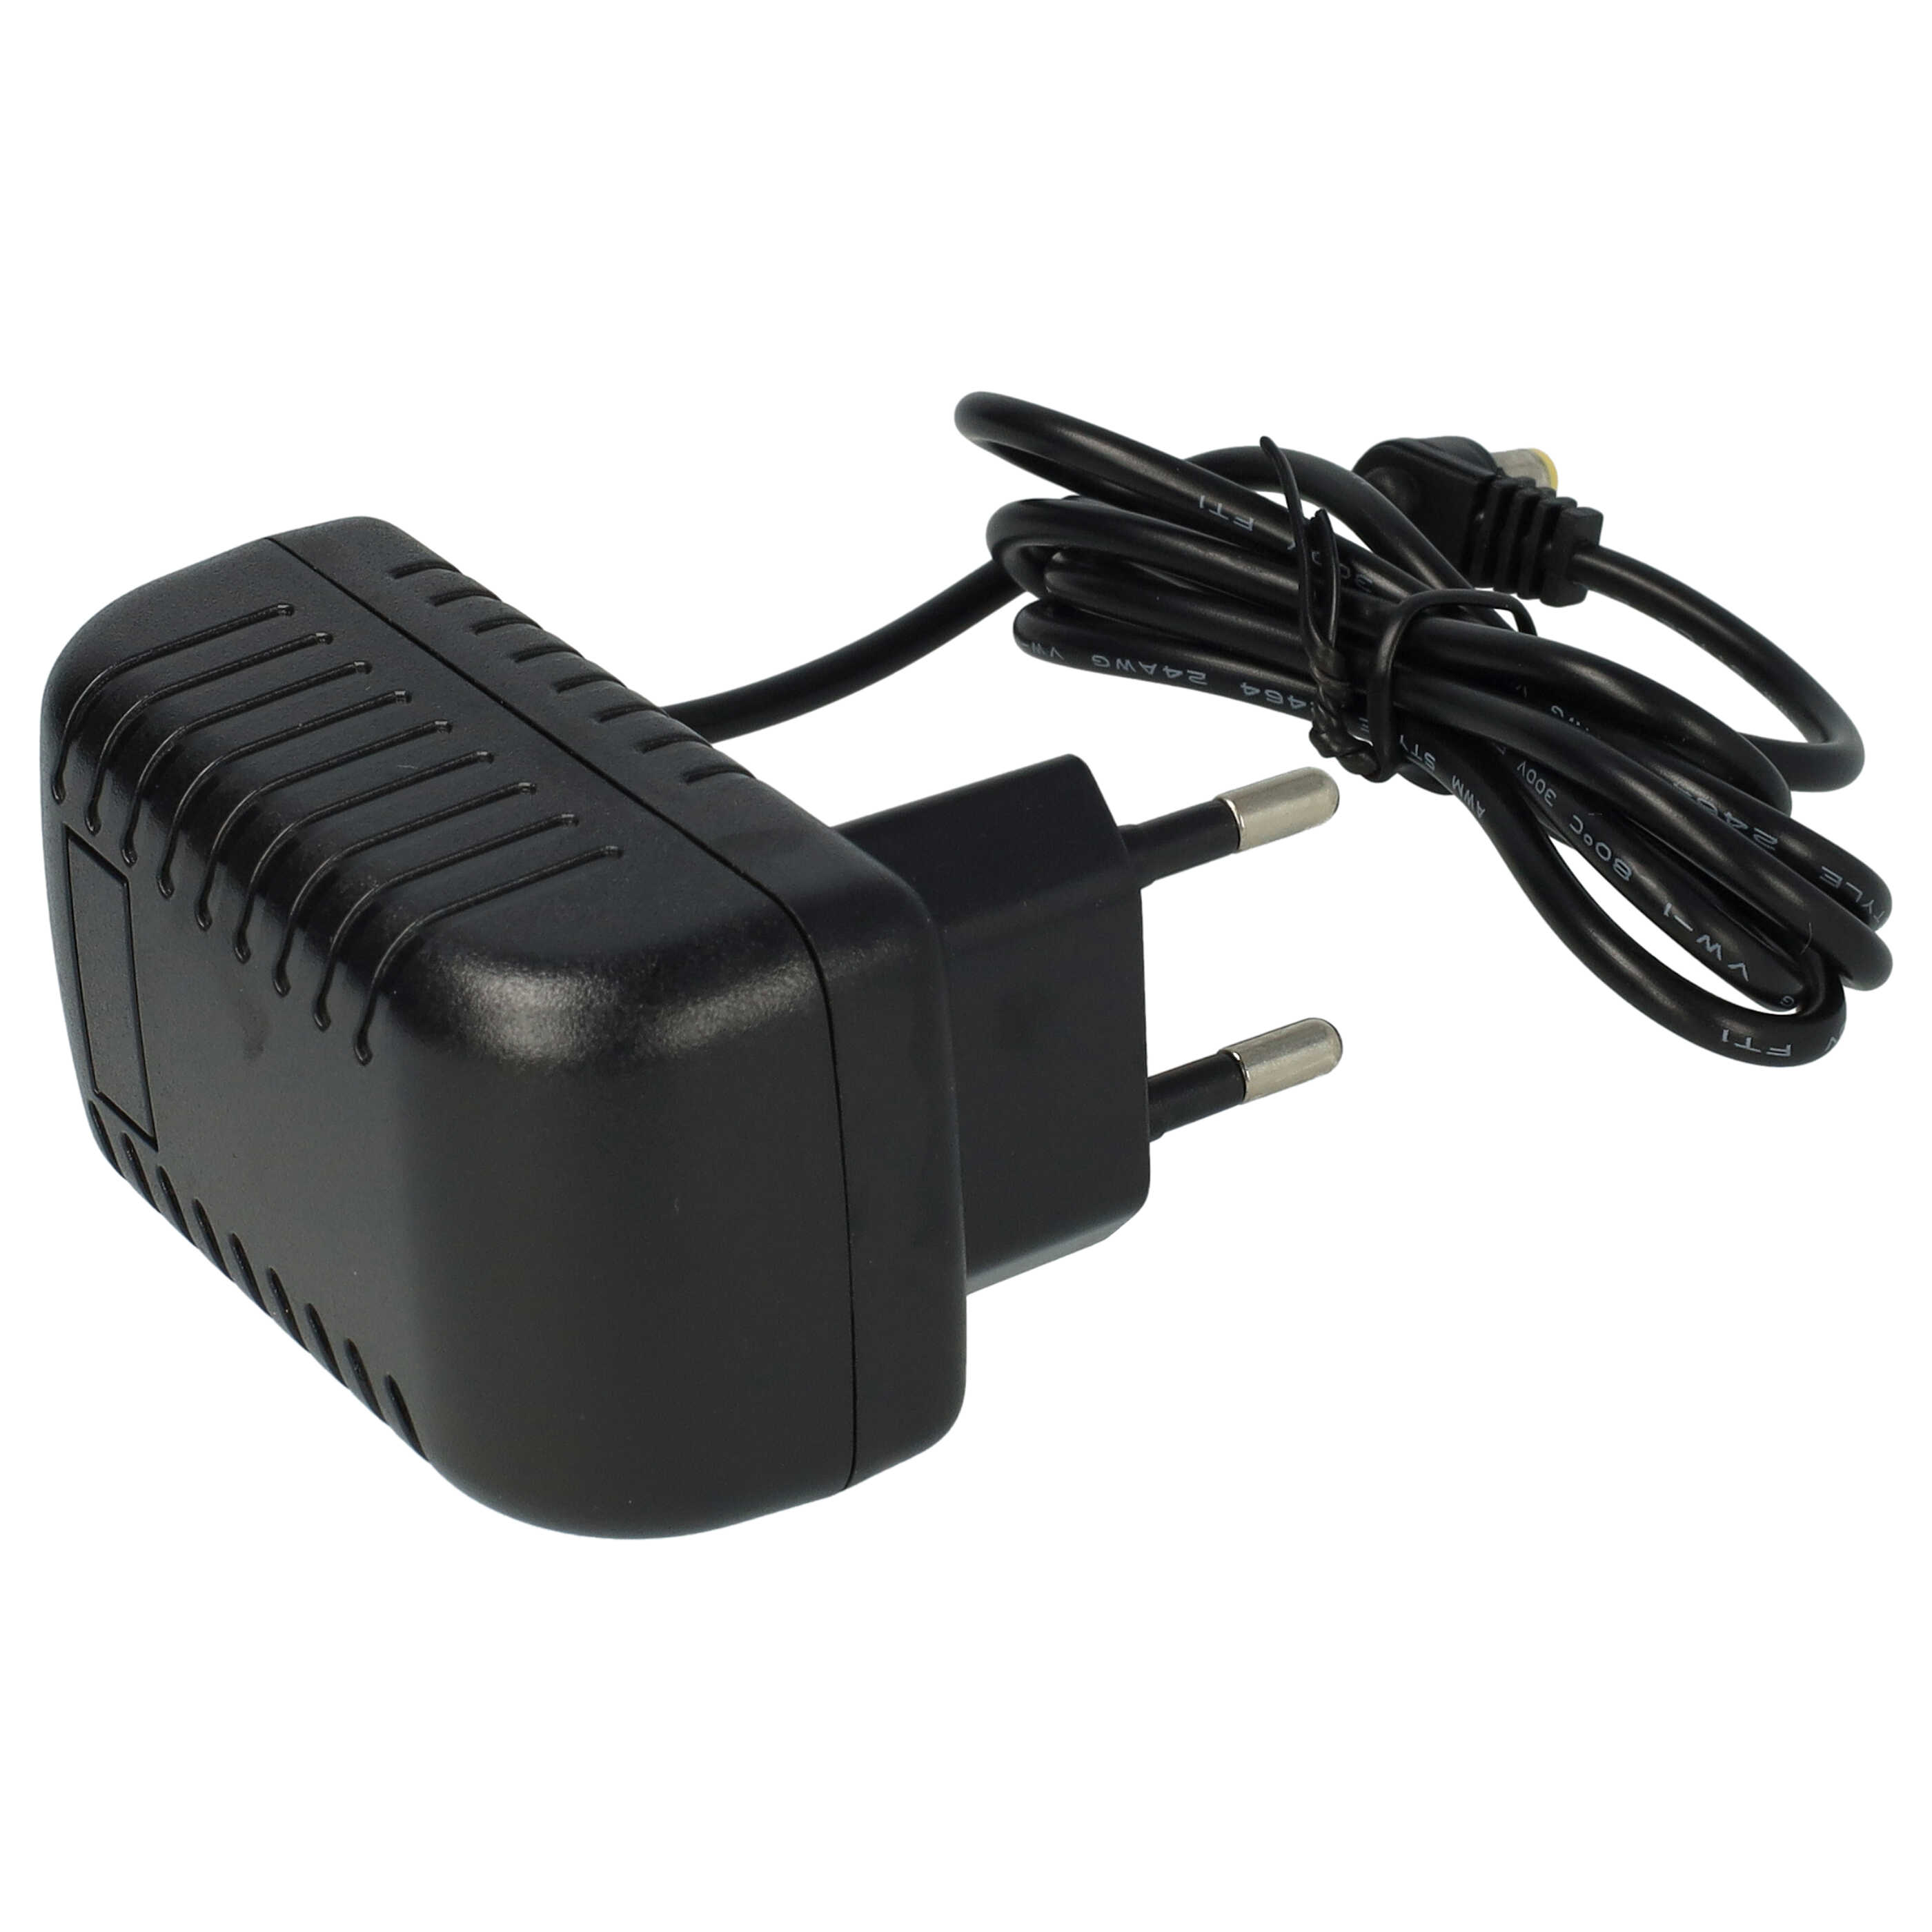 Mains Power Adapter replaces ENG 3A-052WP052 for Cisco router - 200 cm